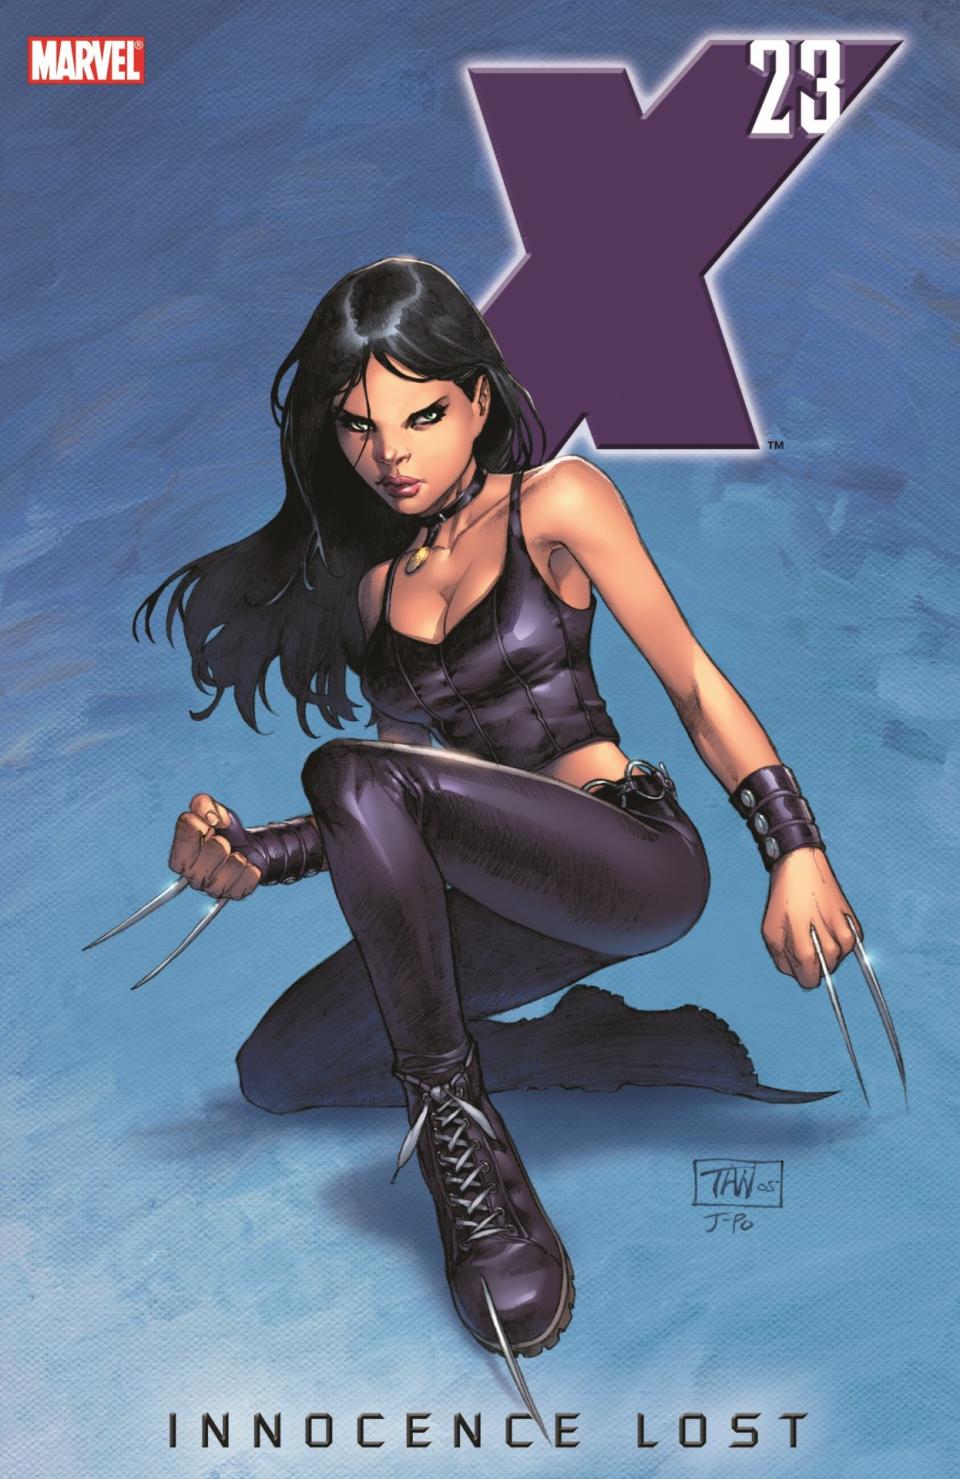 The cover for the collected X-23: Innocence Lost shows Laura Kinney a young women